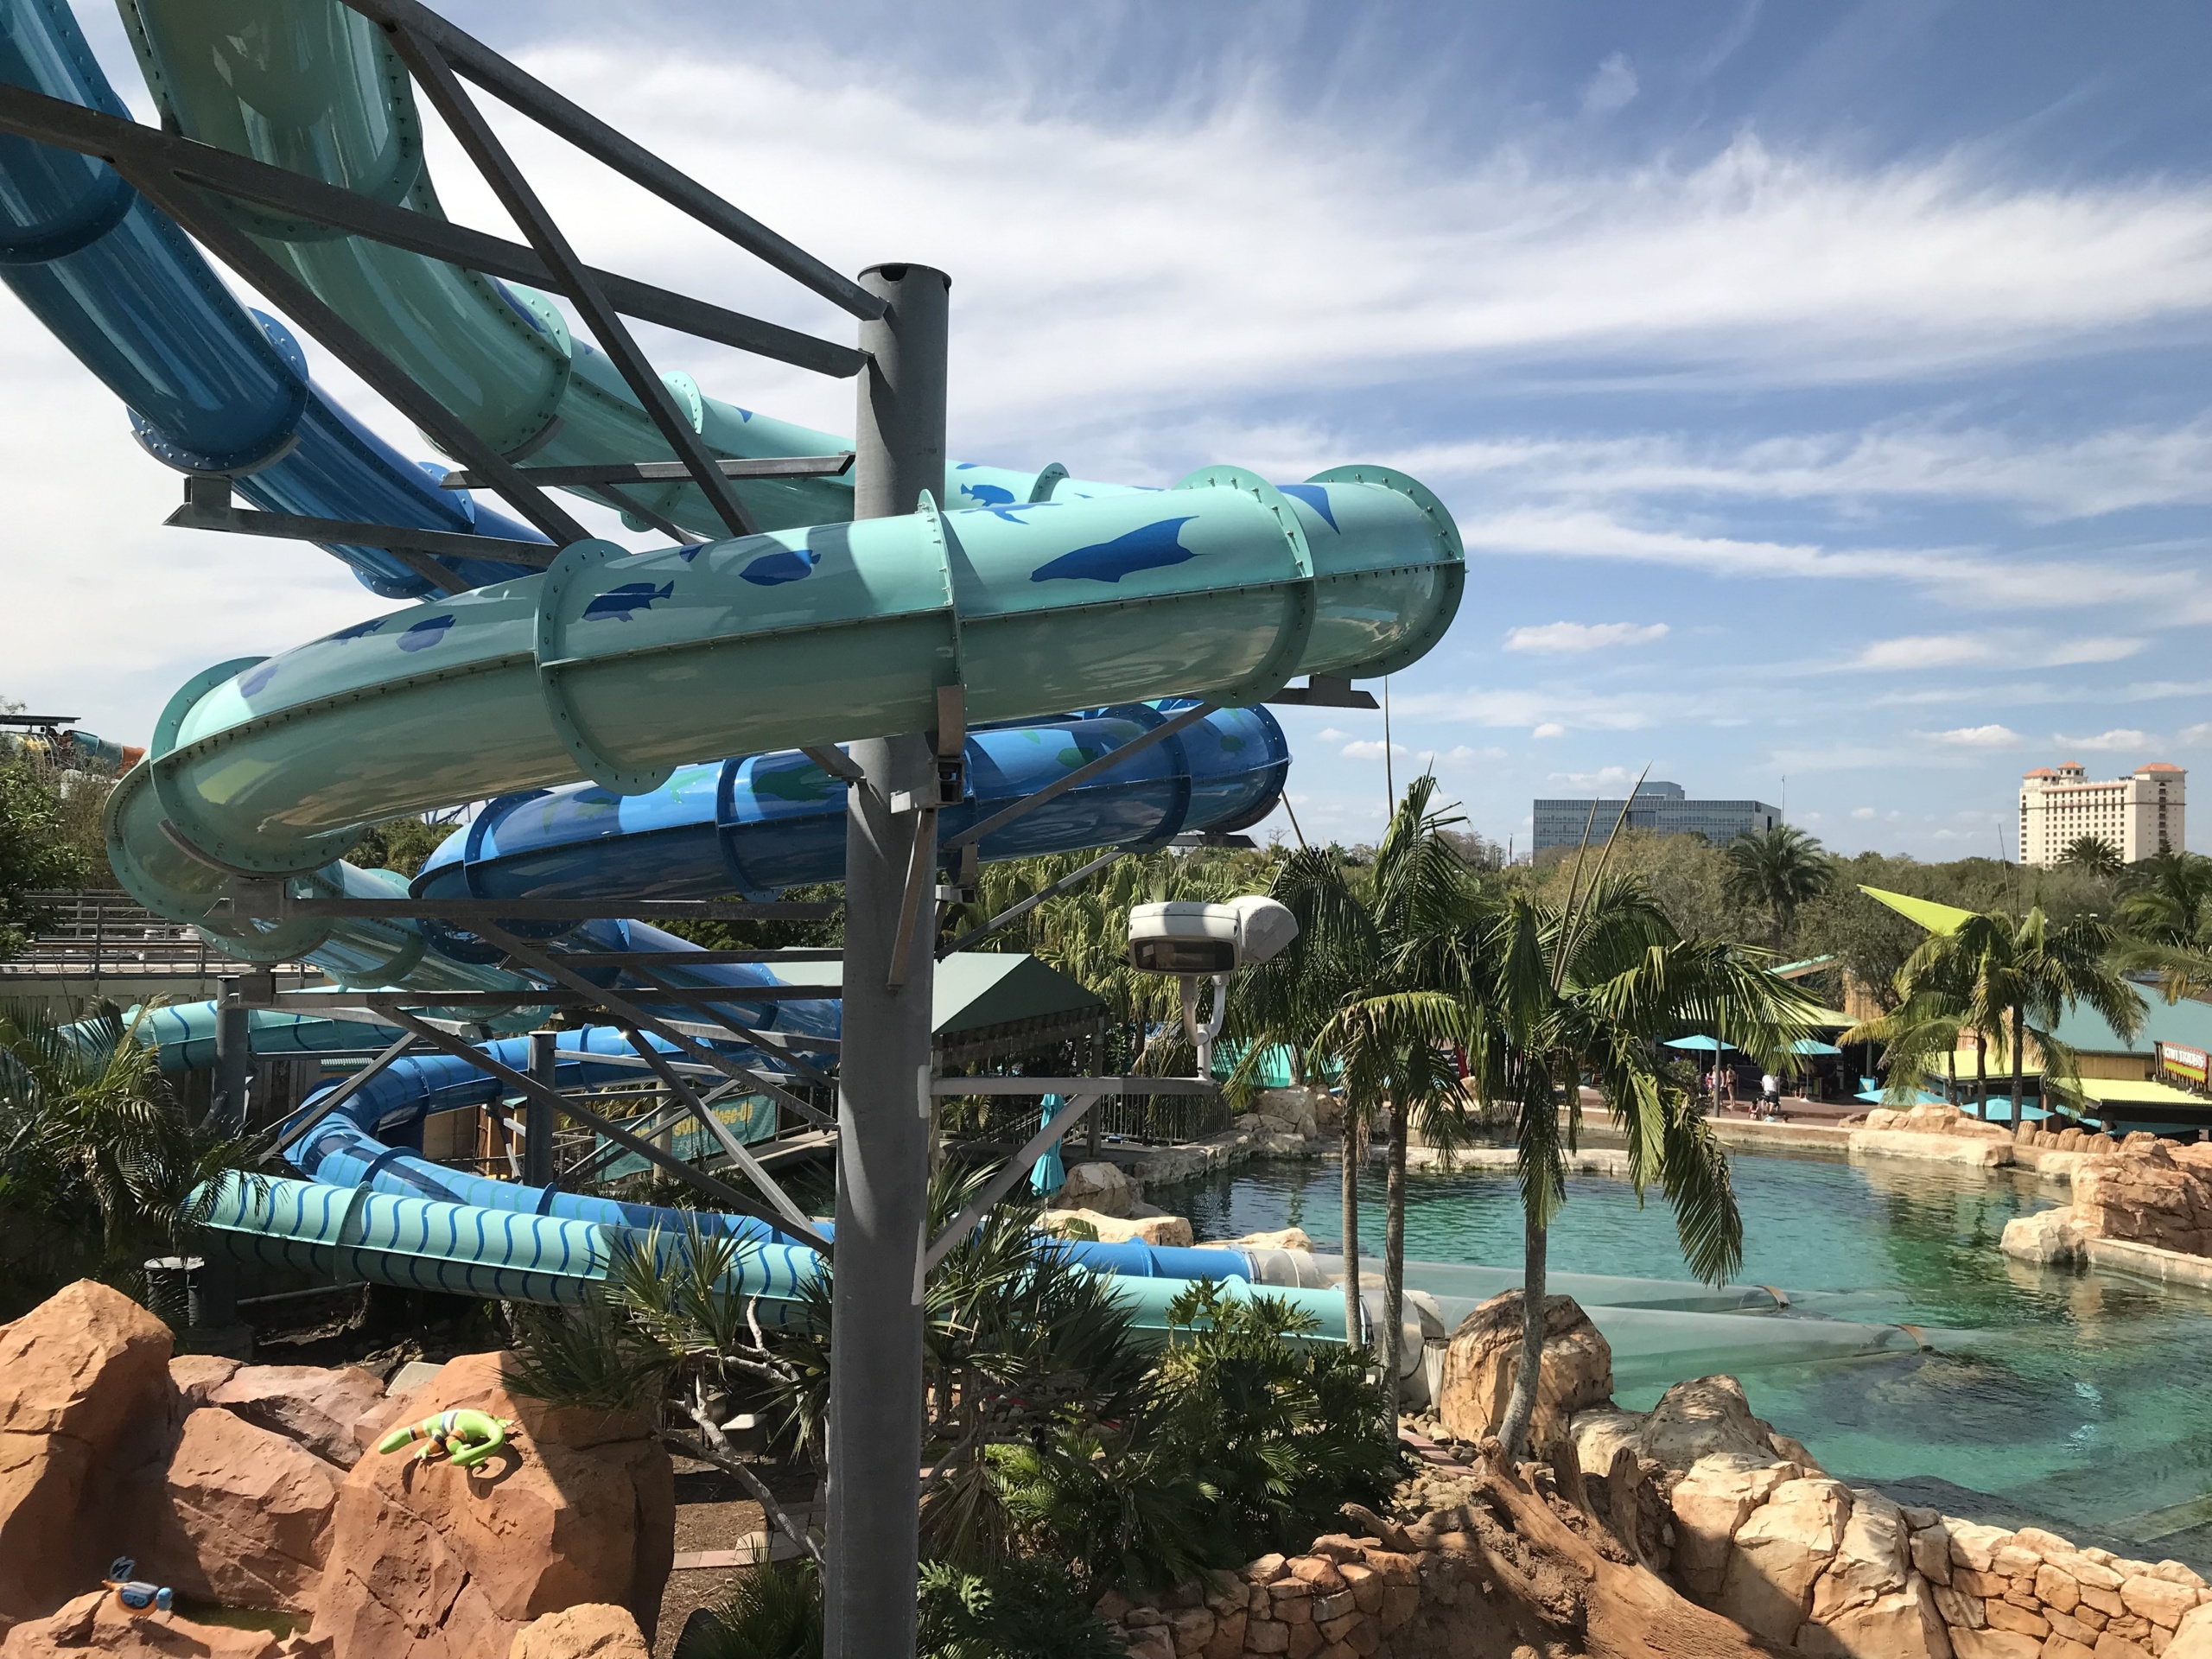 Blue water slides that plunge into water